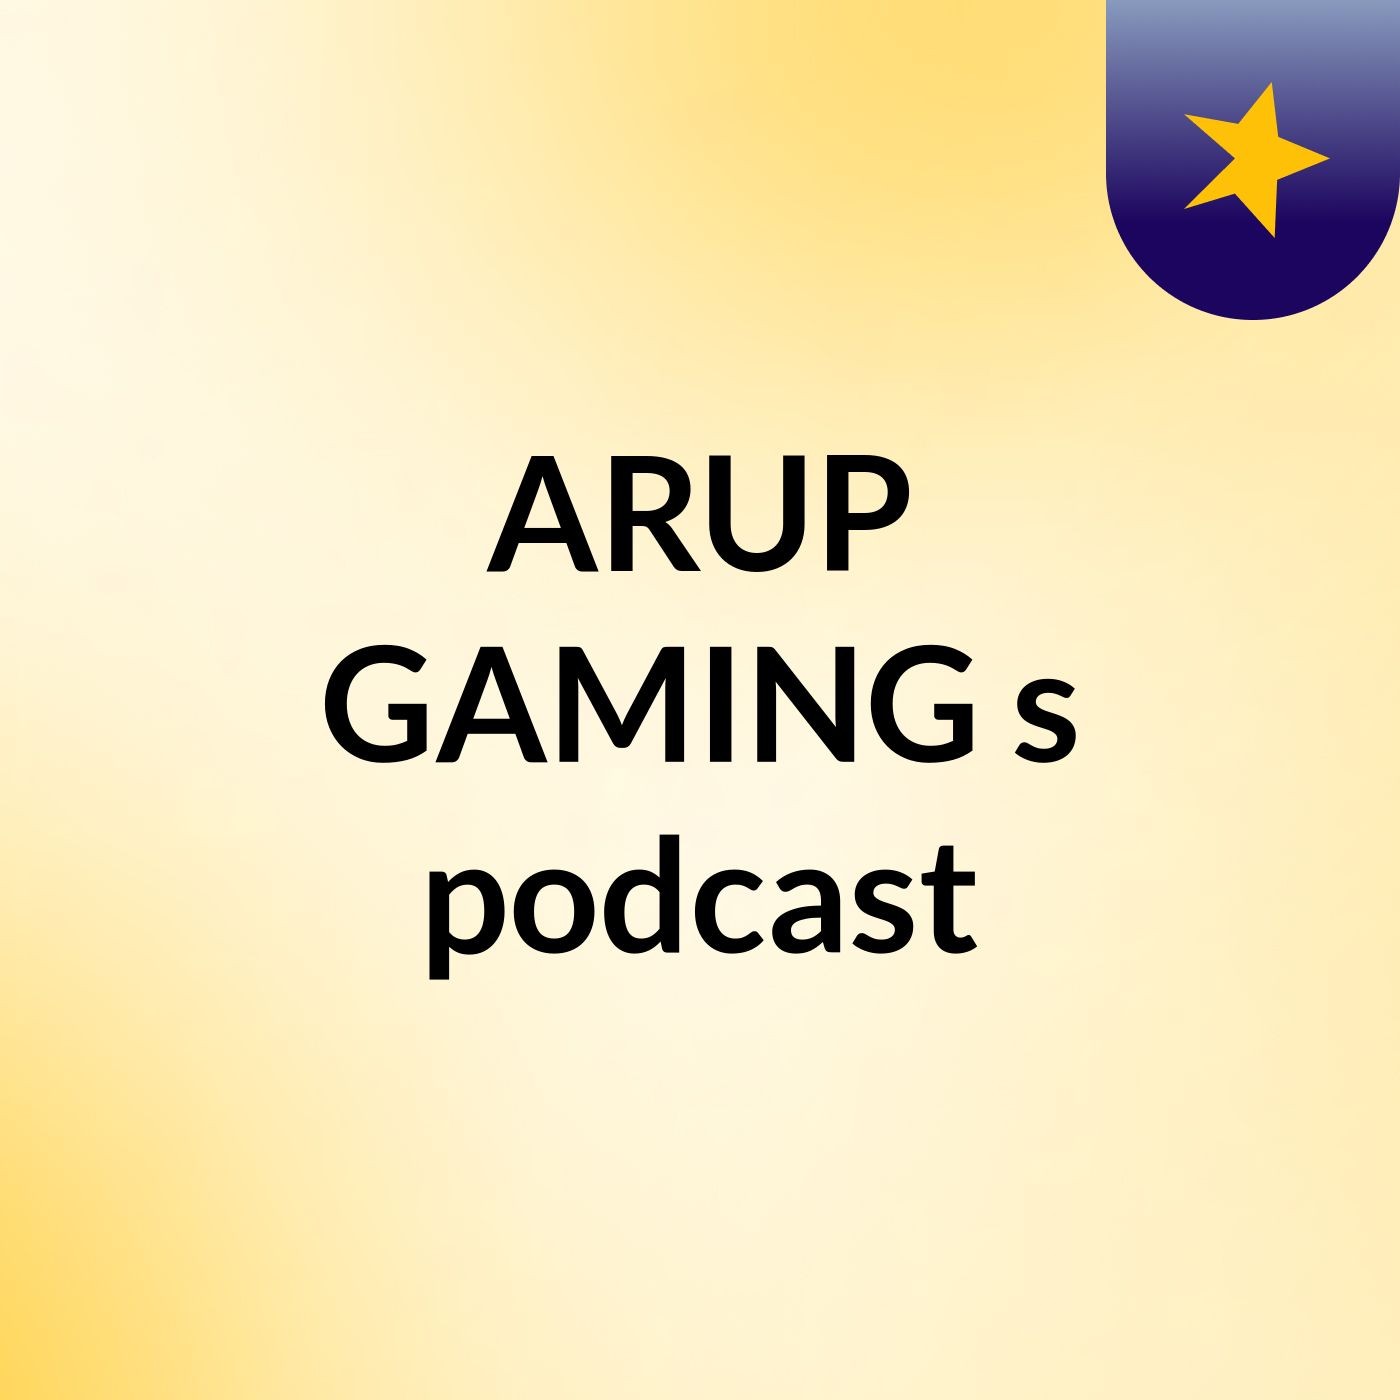 ARUP GAMING's podcast